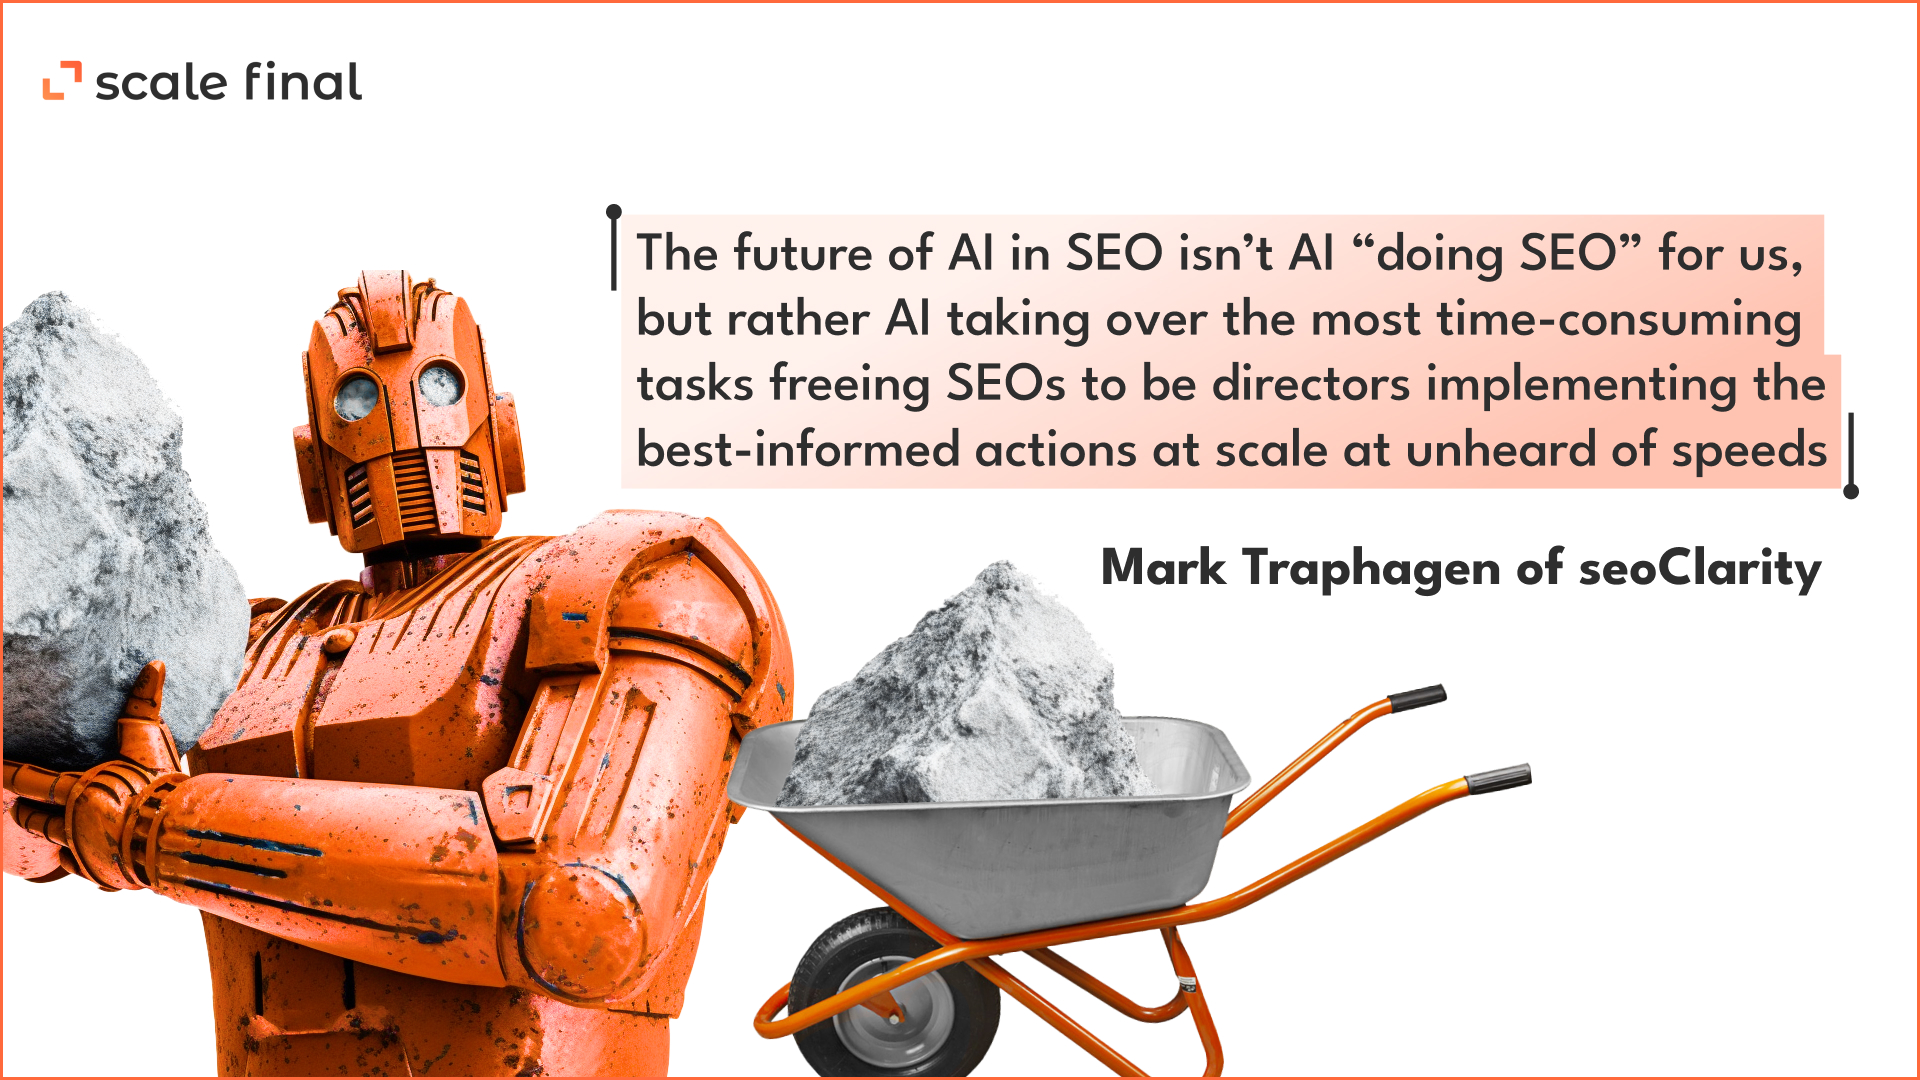 Mark Traphagen of seoClarity said: ‘The future of AI in SEO isn’t AI “doing SEO” for us, but rather AI taking over the most time-consuming tasks freeing SEOs to be directors implementing the best-informed actions at scale at unheard of speeds.